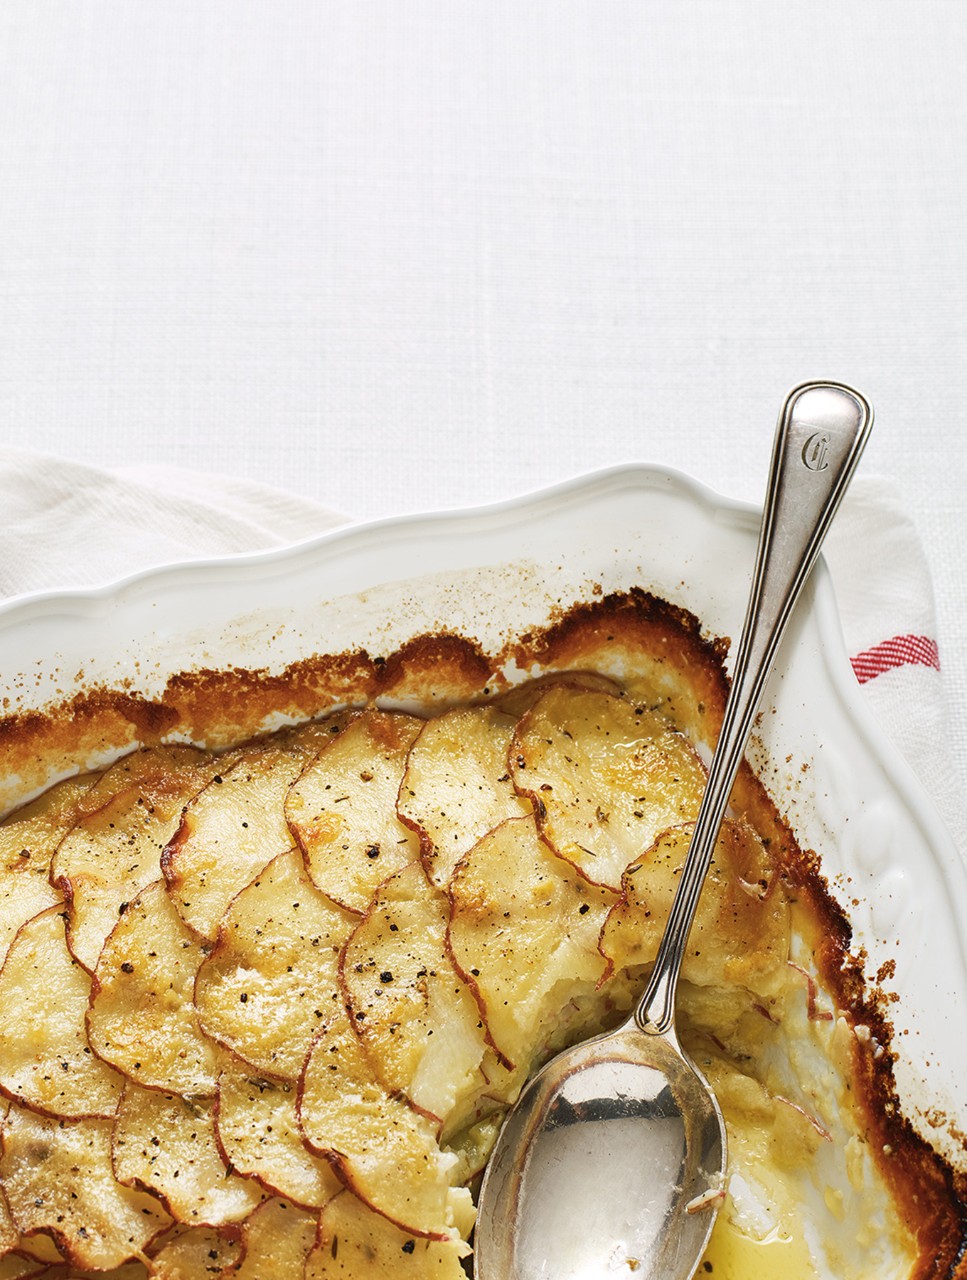 The Vrai French Gratin of Potatoes